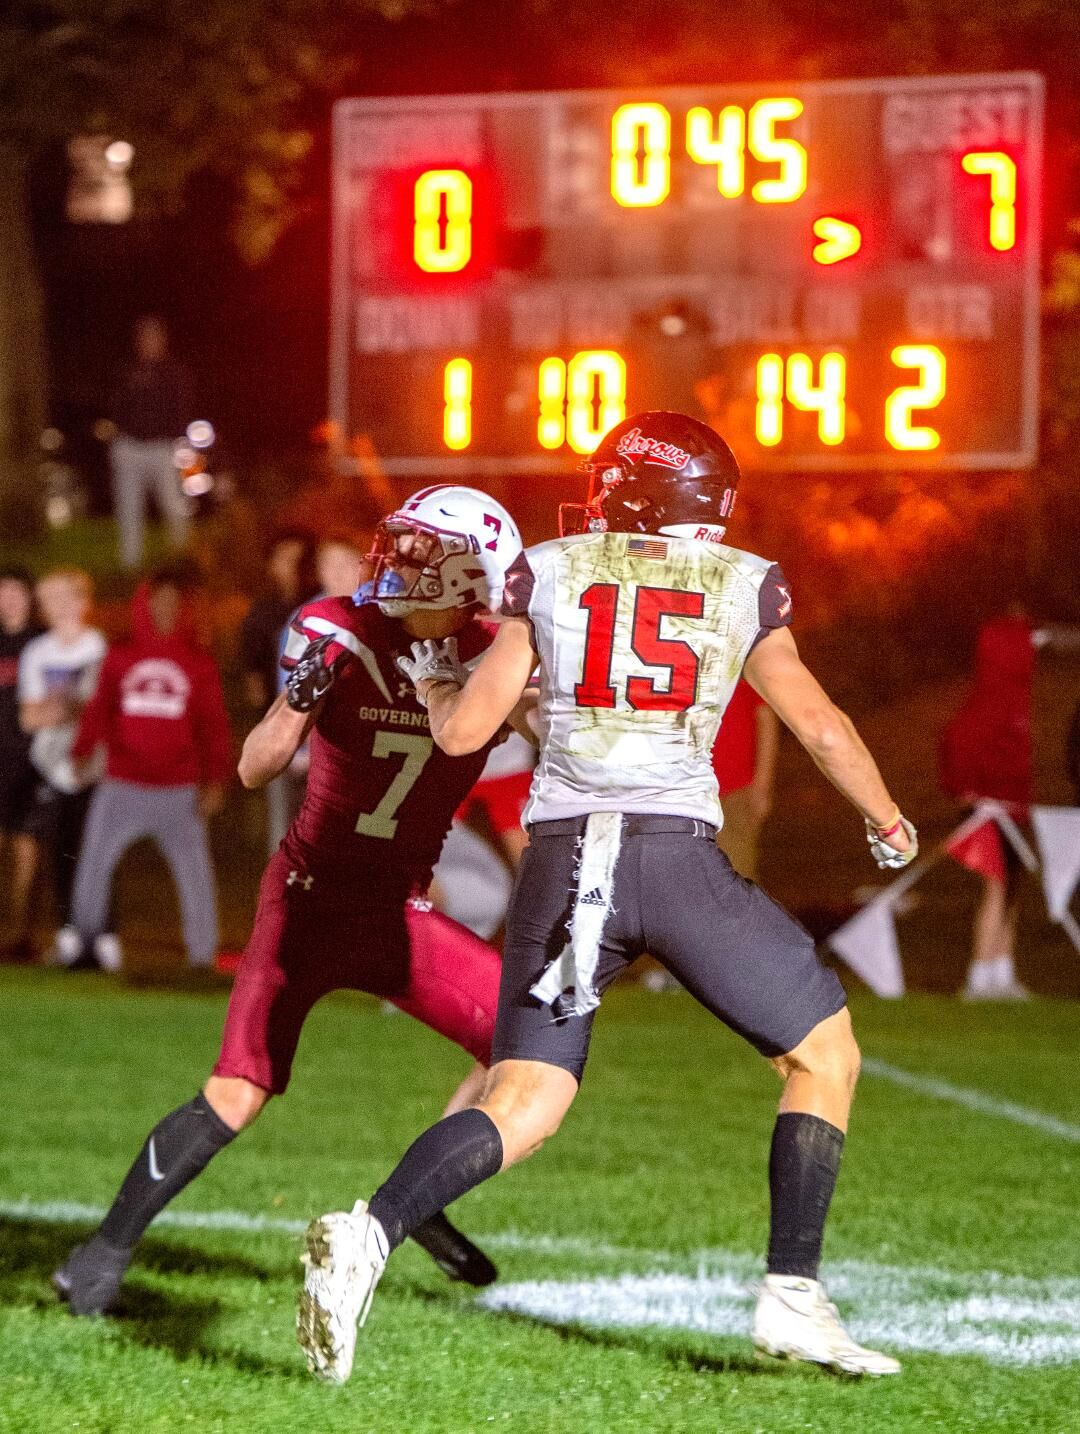 Byfield native Kingsbury (2 TDs) helps Governor’s beat Thayer